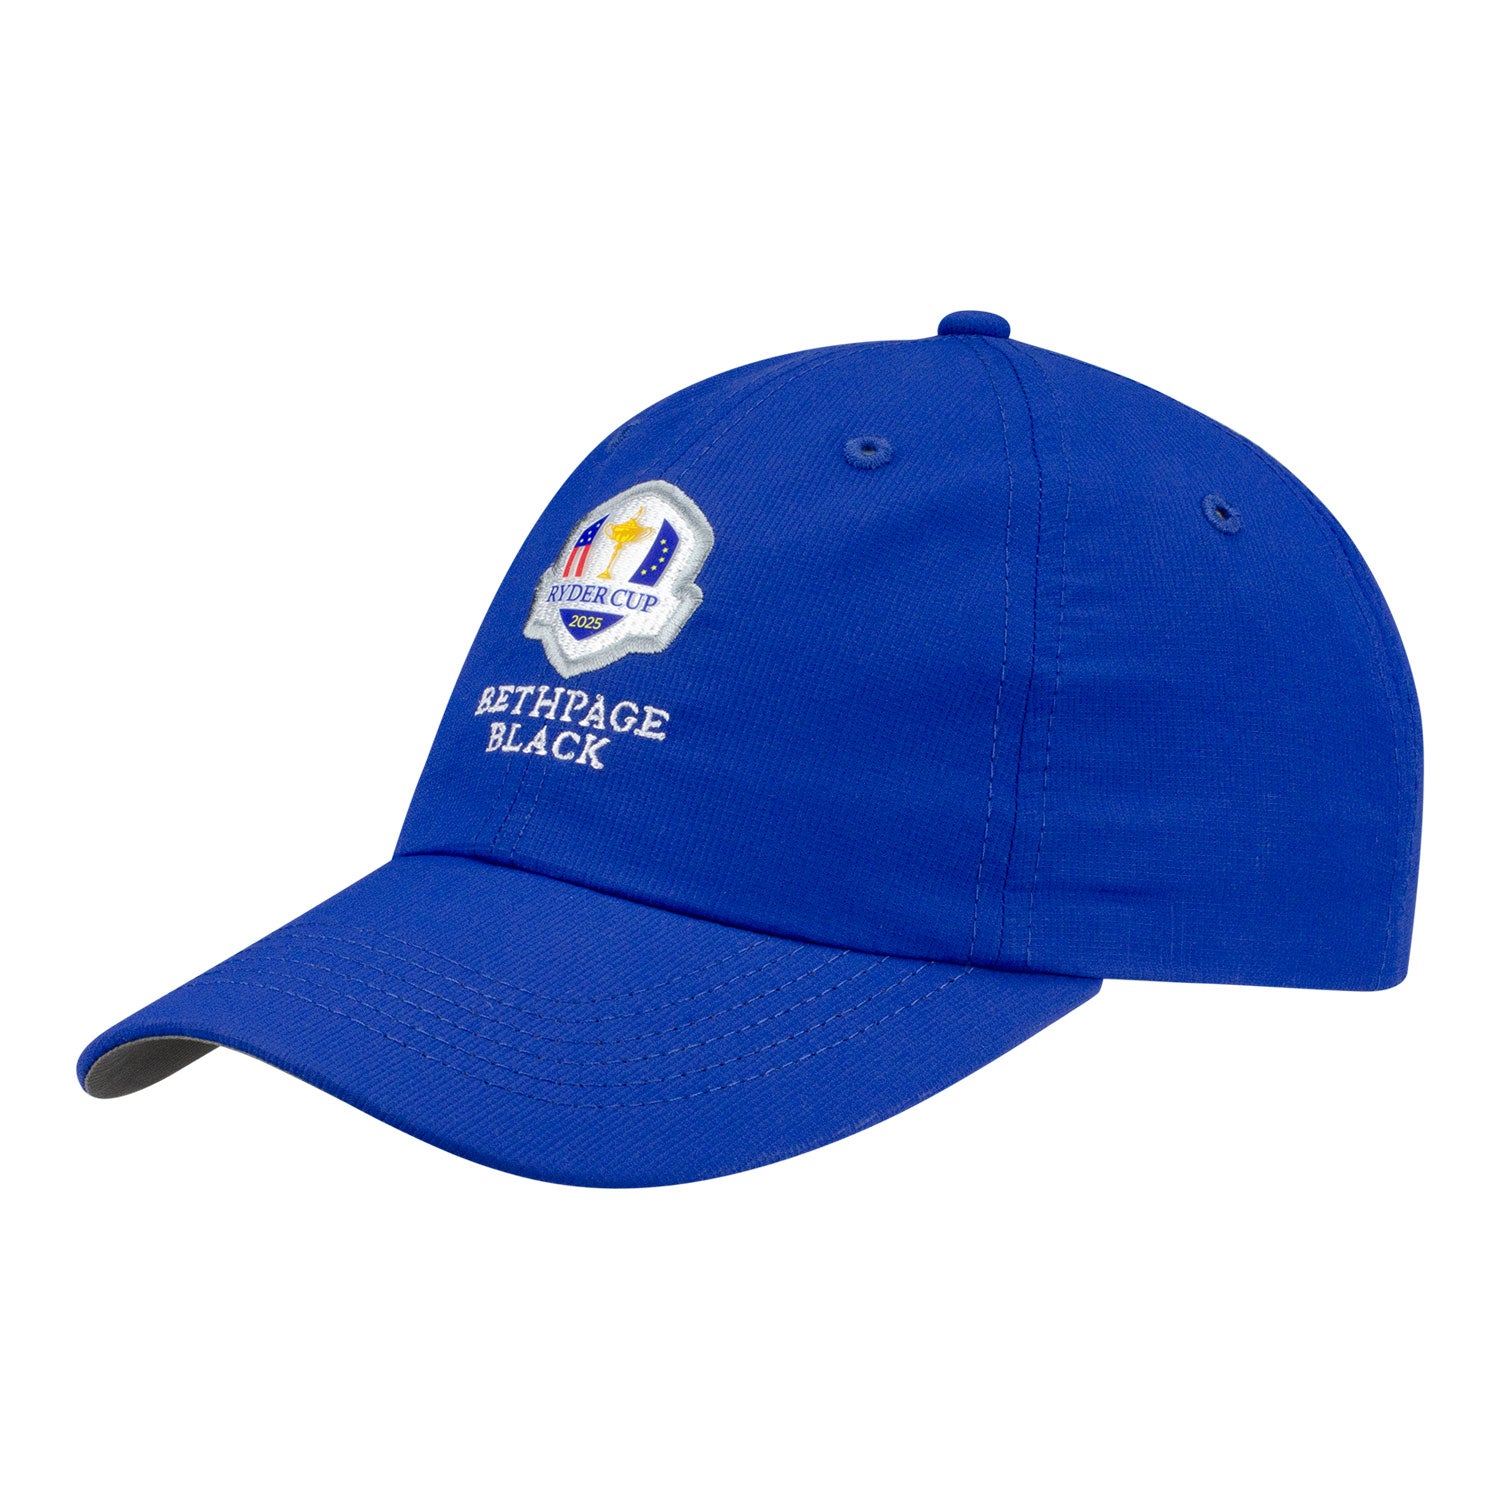 Imperial 2025 Ryder Cup Original Performance Hat in Cobalt - Angled Front Left View